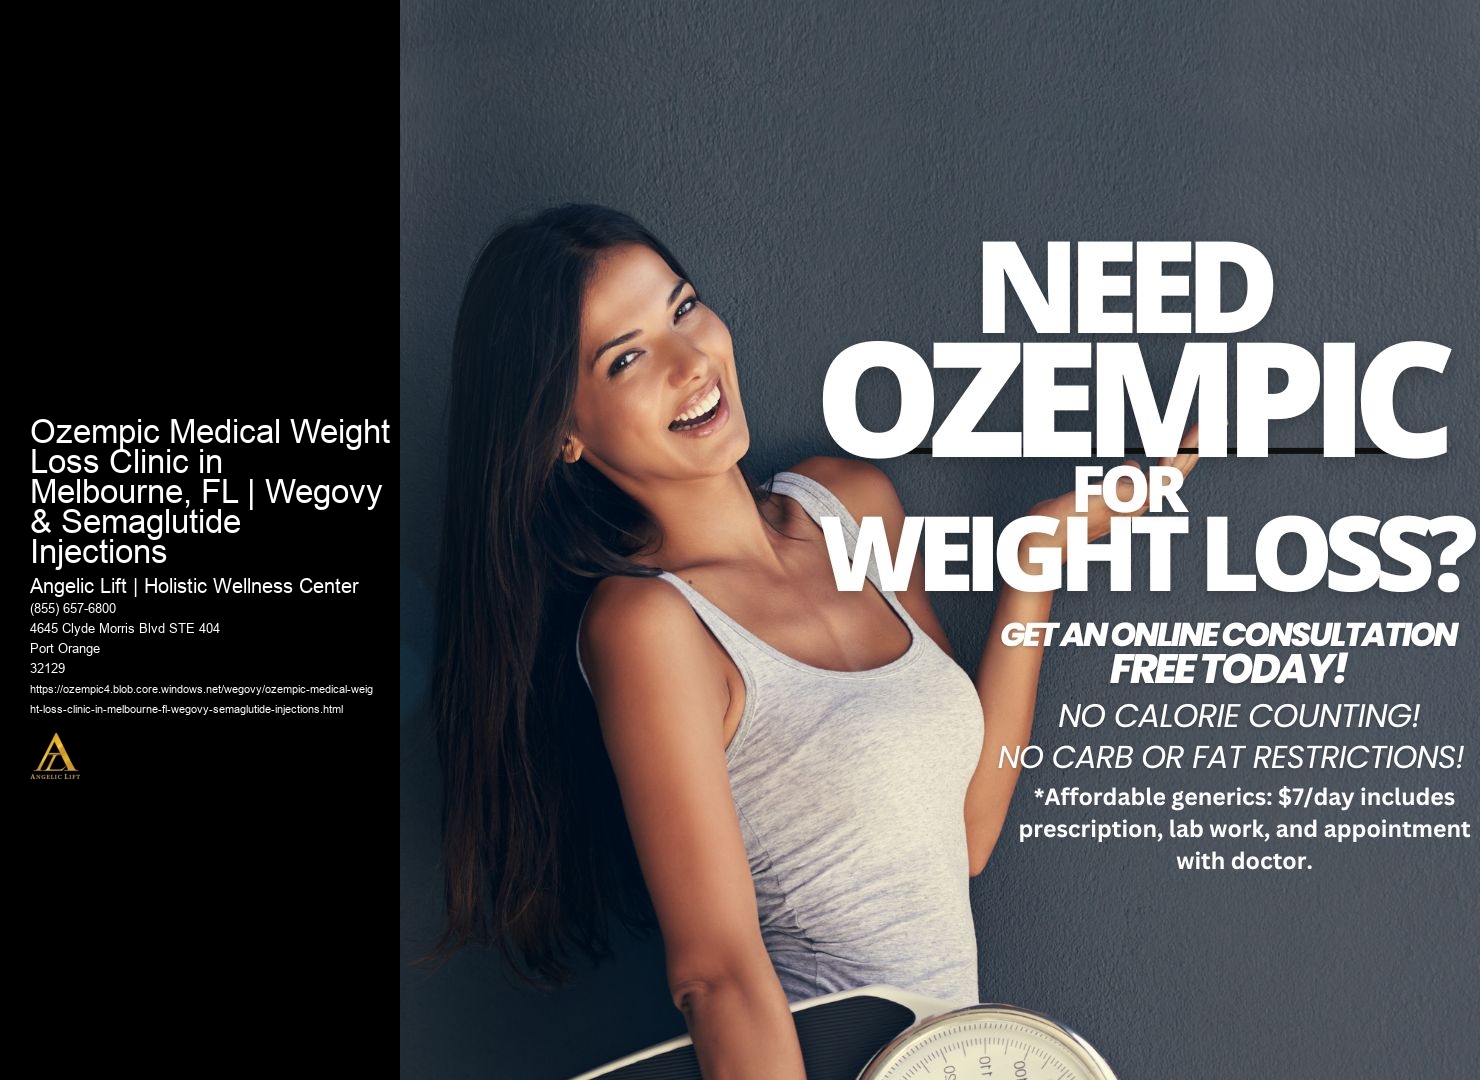 Ozempic Medical Weight Loss Clinic in Melbourne, FL | Wegovy & Semaglutide Injections